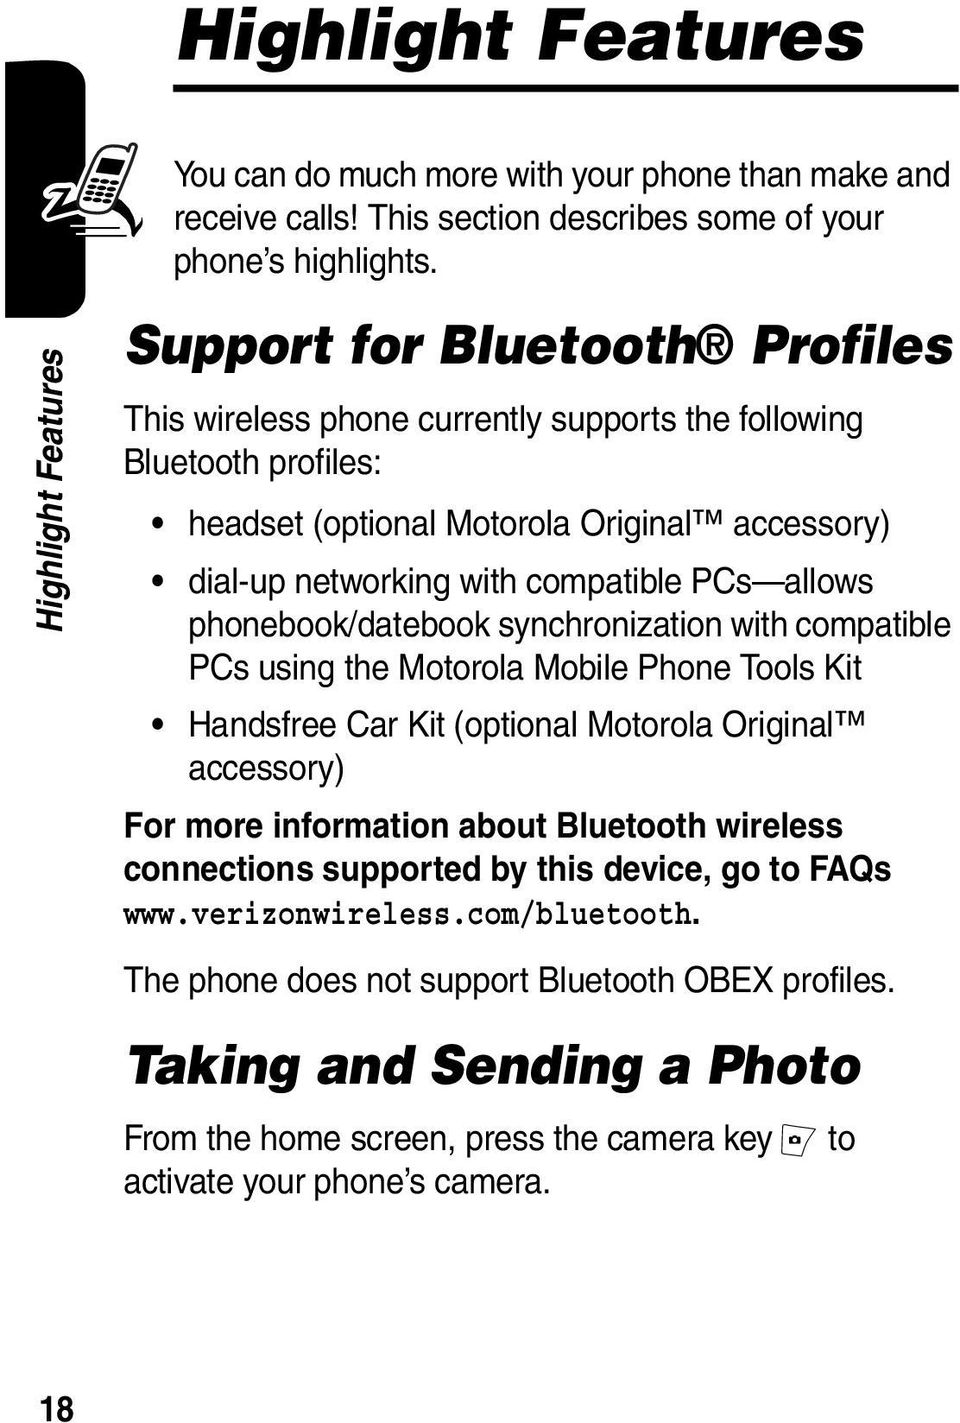 compatible PCs allows phonebook/datebook synchronization with compatible PCs using the Motorola Mobile Phone Tools Kit Handsfree Car Kit (optional Motorola Original accessory) For more information